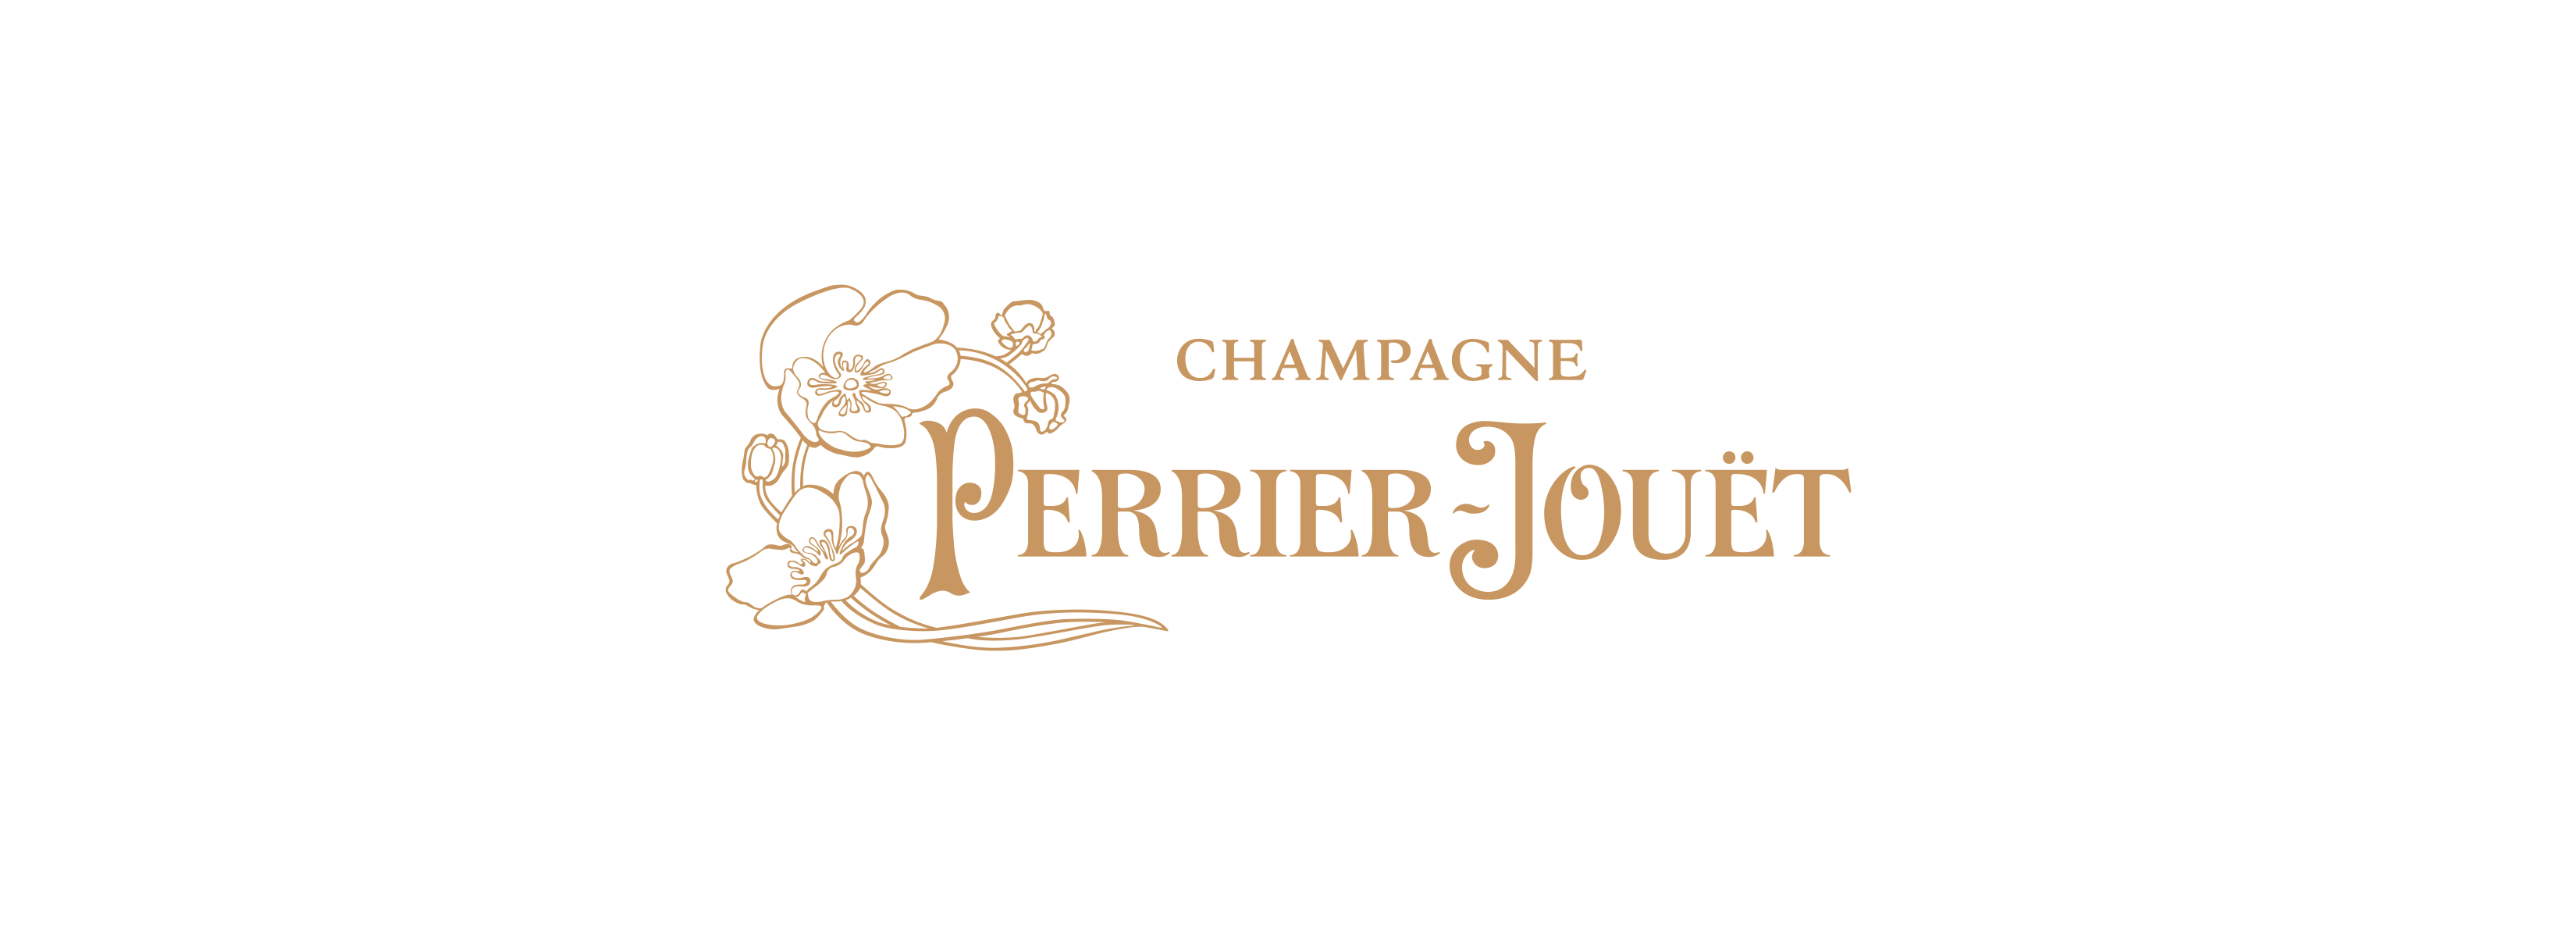 Perrier Jouet 1811 Logo Background PNG Image